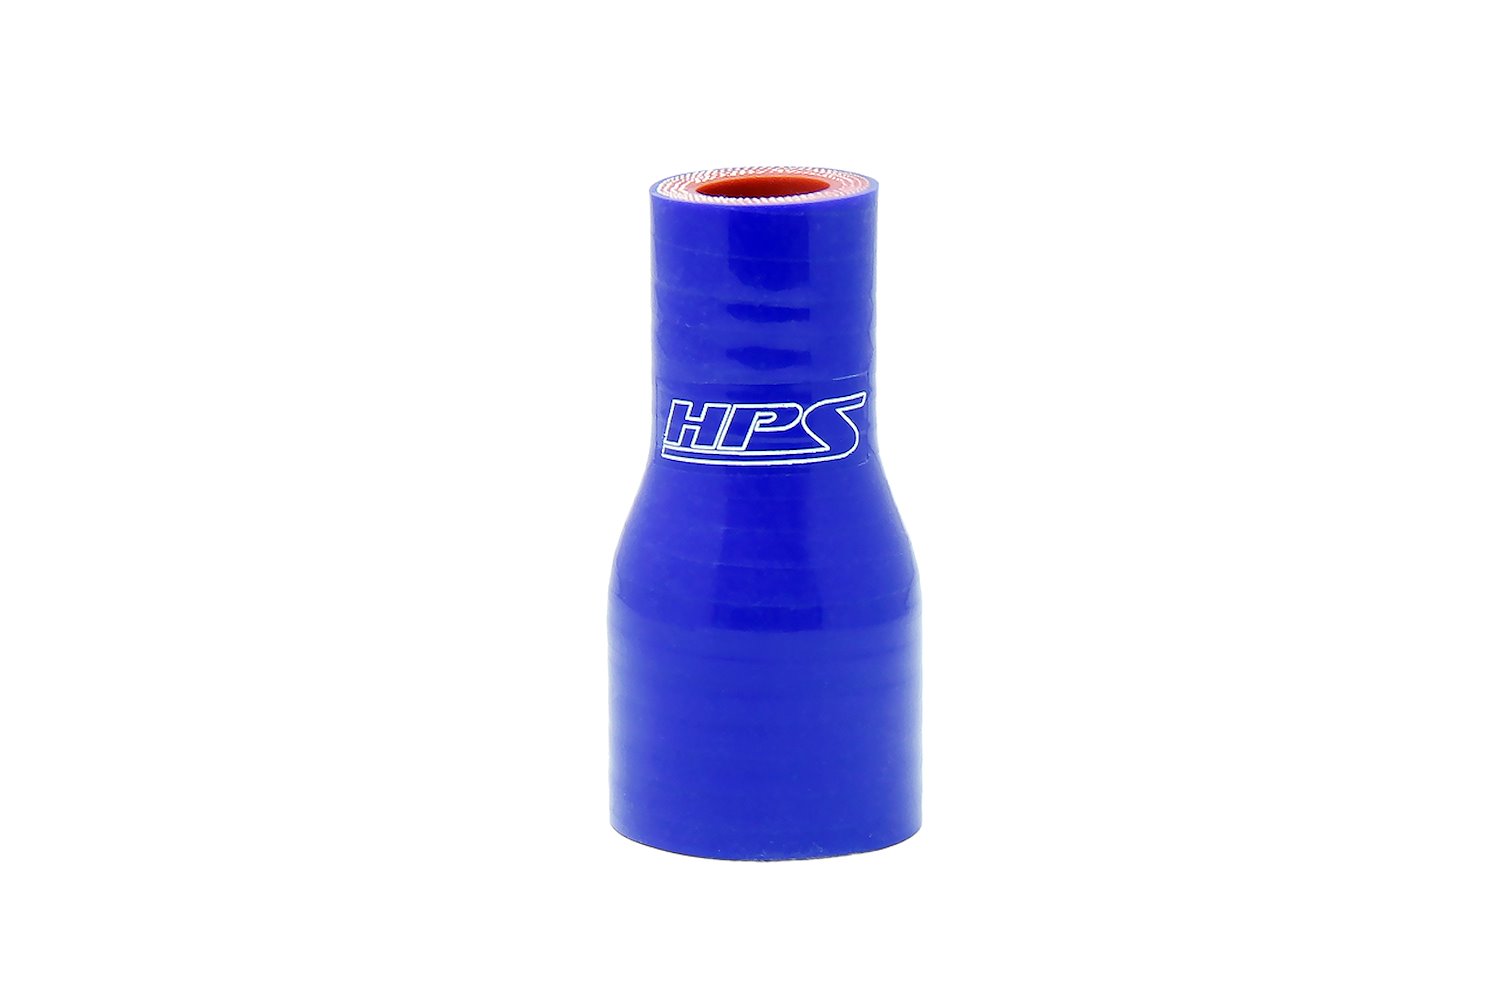 HTSR-112-200-BLUE Silicone Reducer Hose, High-Temp 4-Ply Reinforced, 1-1/8 in. - 2 in. ID, 3 in. Long, Blue